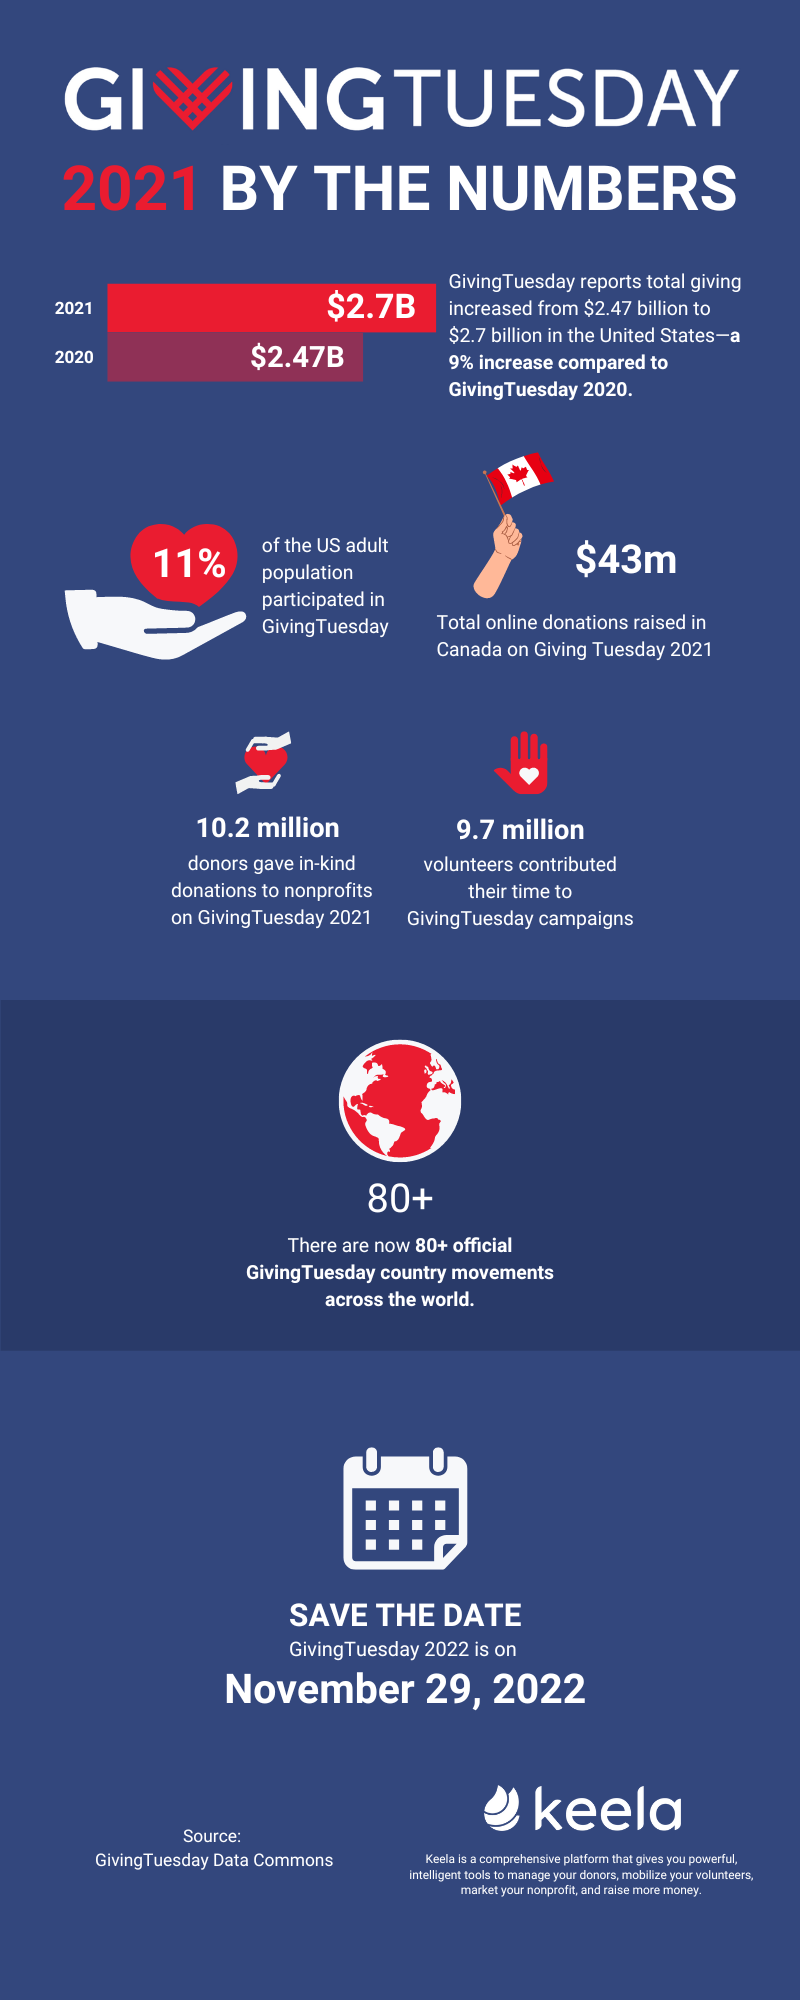 an illustration of the key statistics and results from GivingTuesday 2021